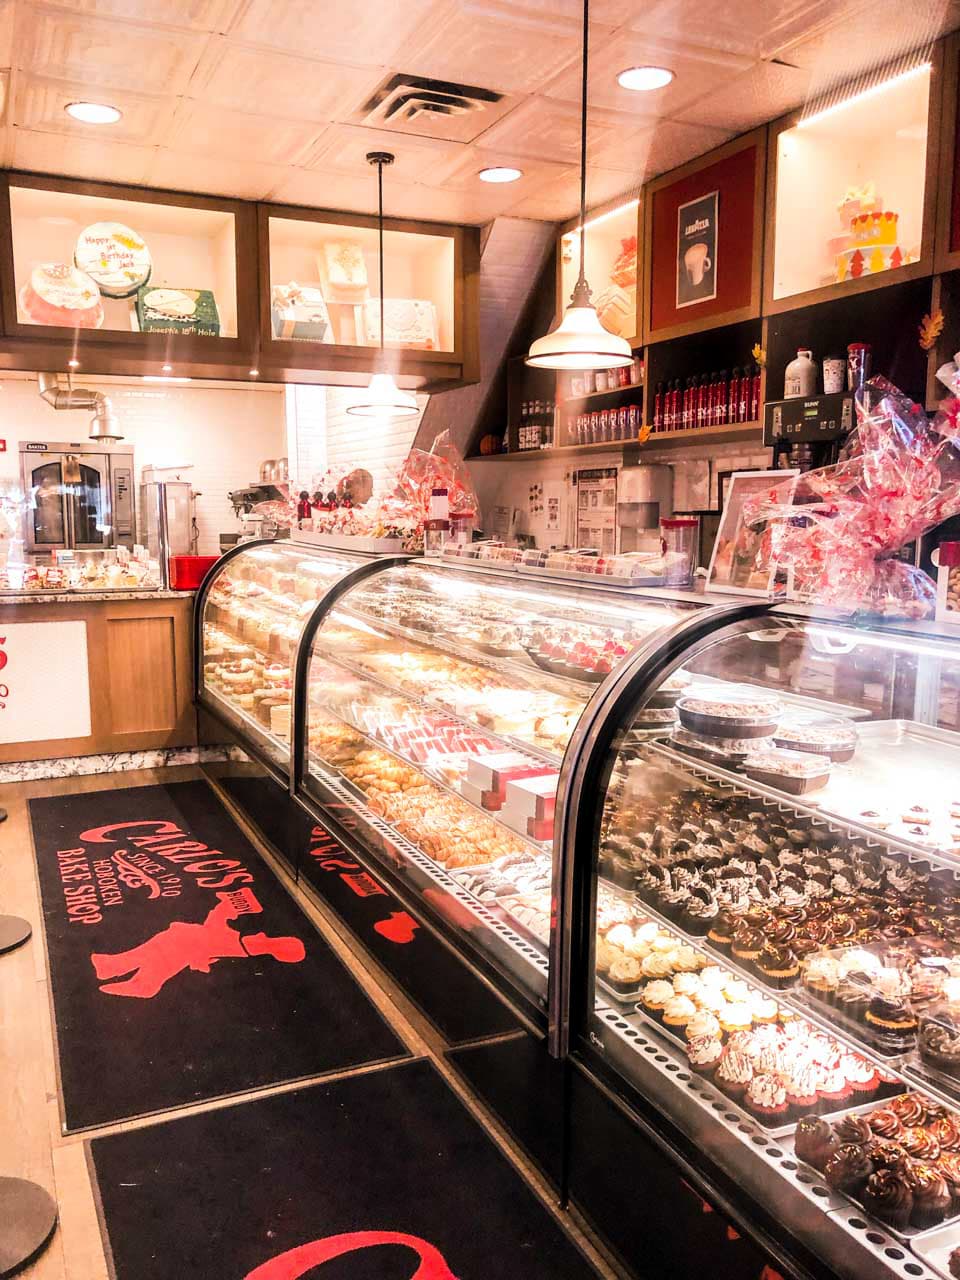 Display cases filled with various cakes and pastries at Carlo's Bake Shop in Hoboken, NJ